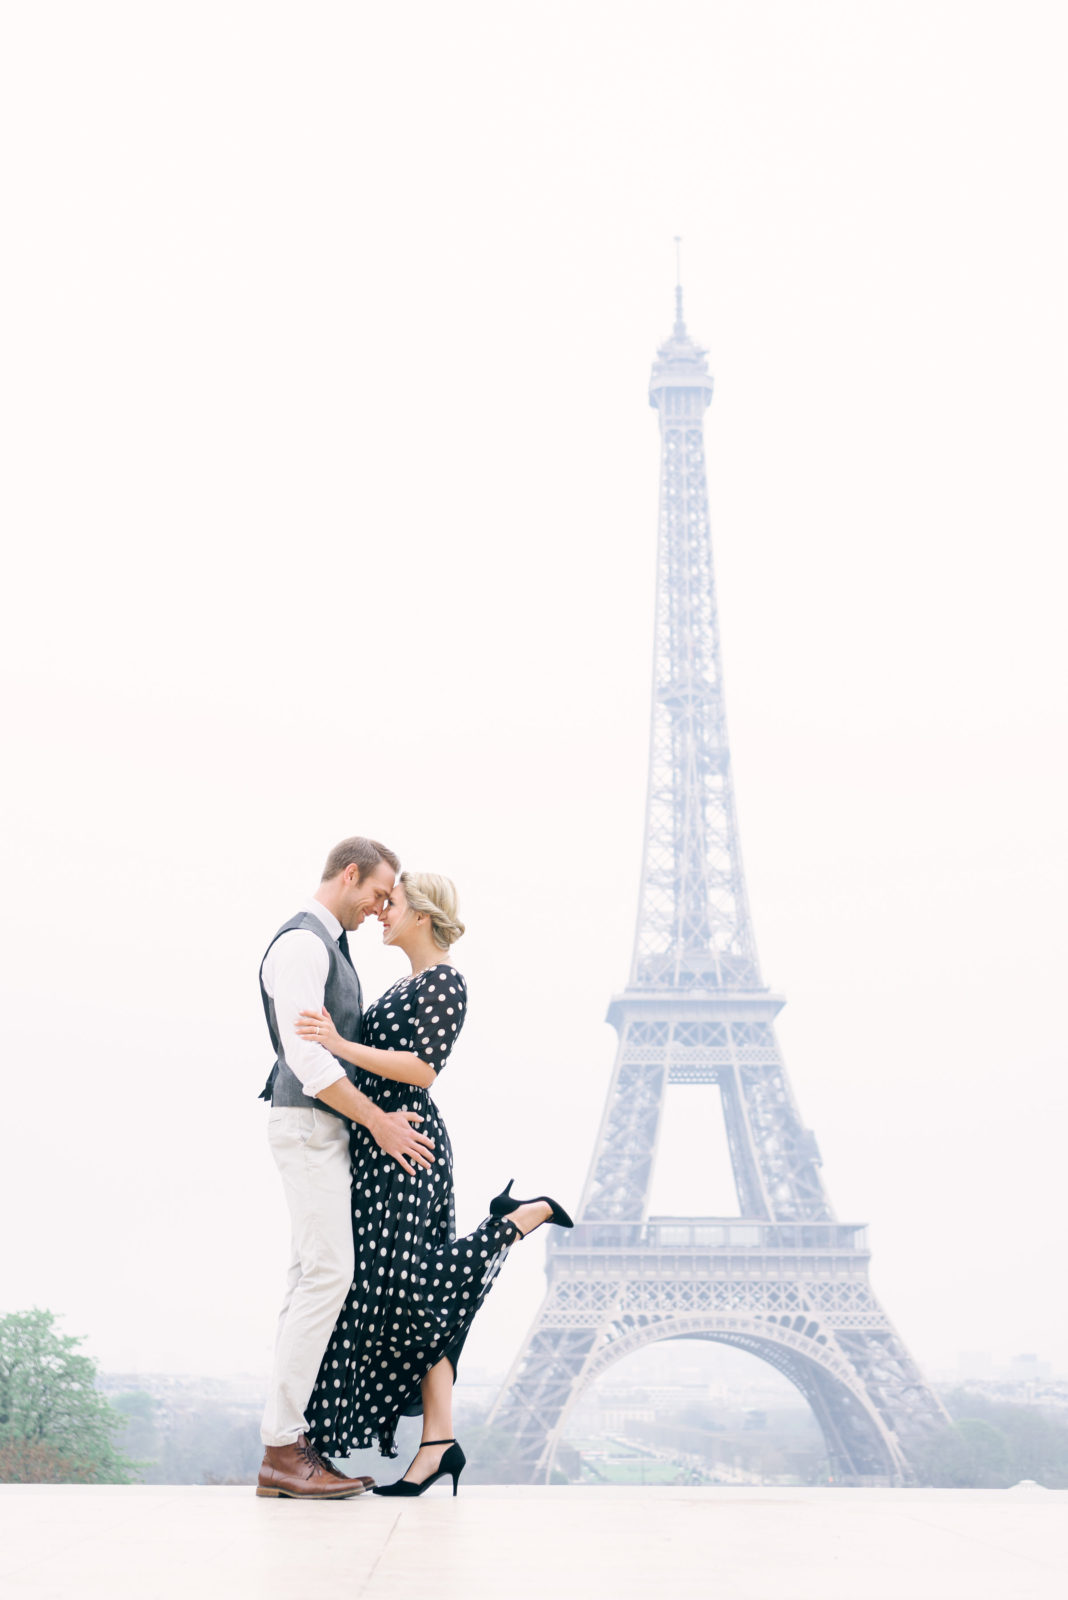 Brooke & Doug at the Eiffel Tower photo by Tim Moore Photography